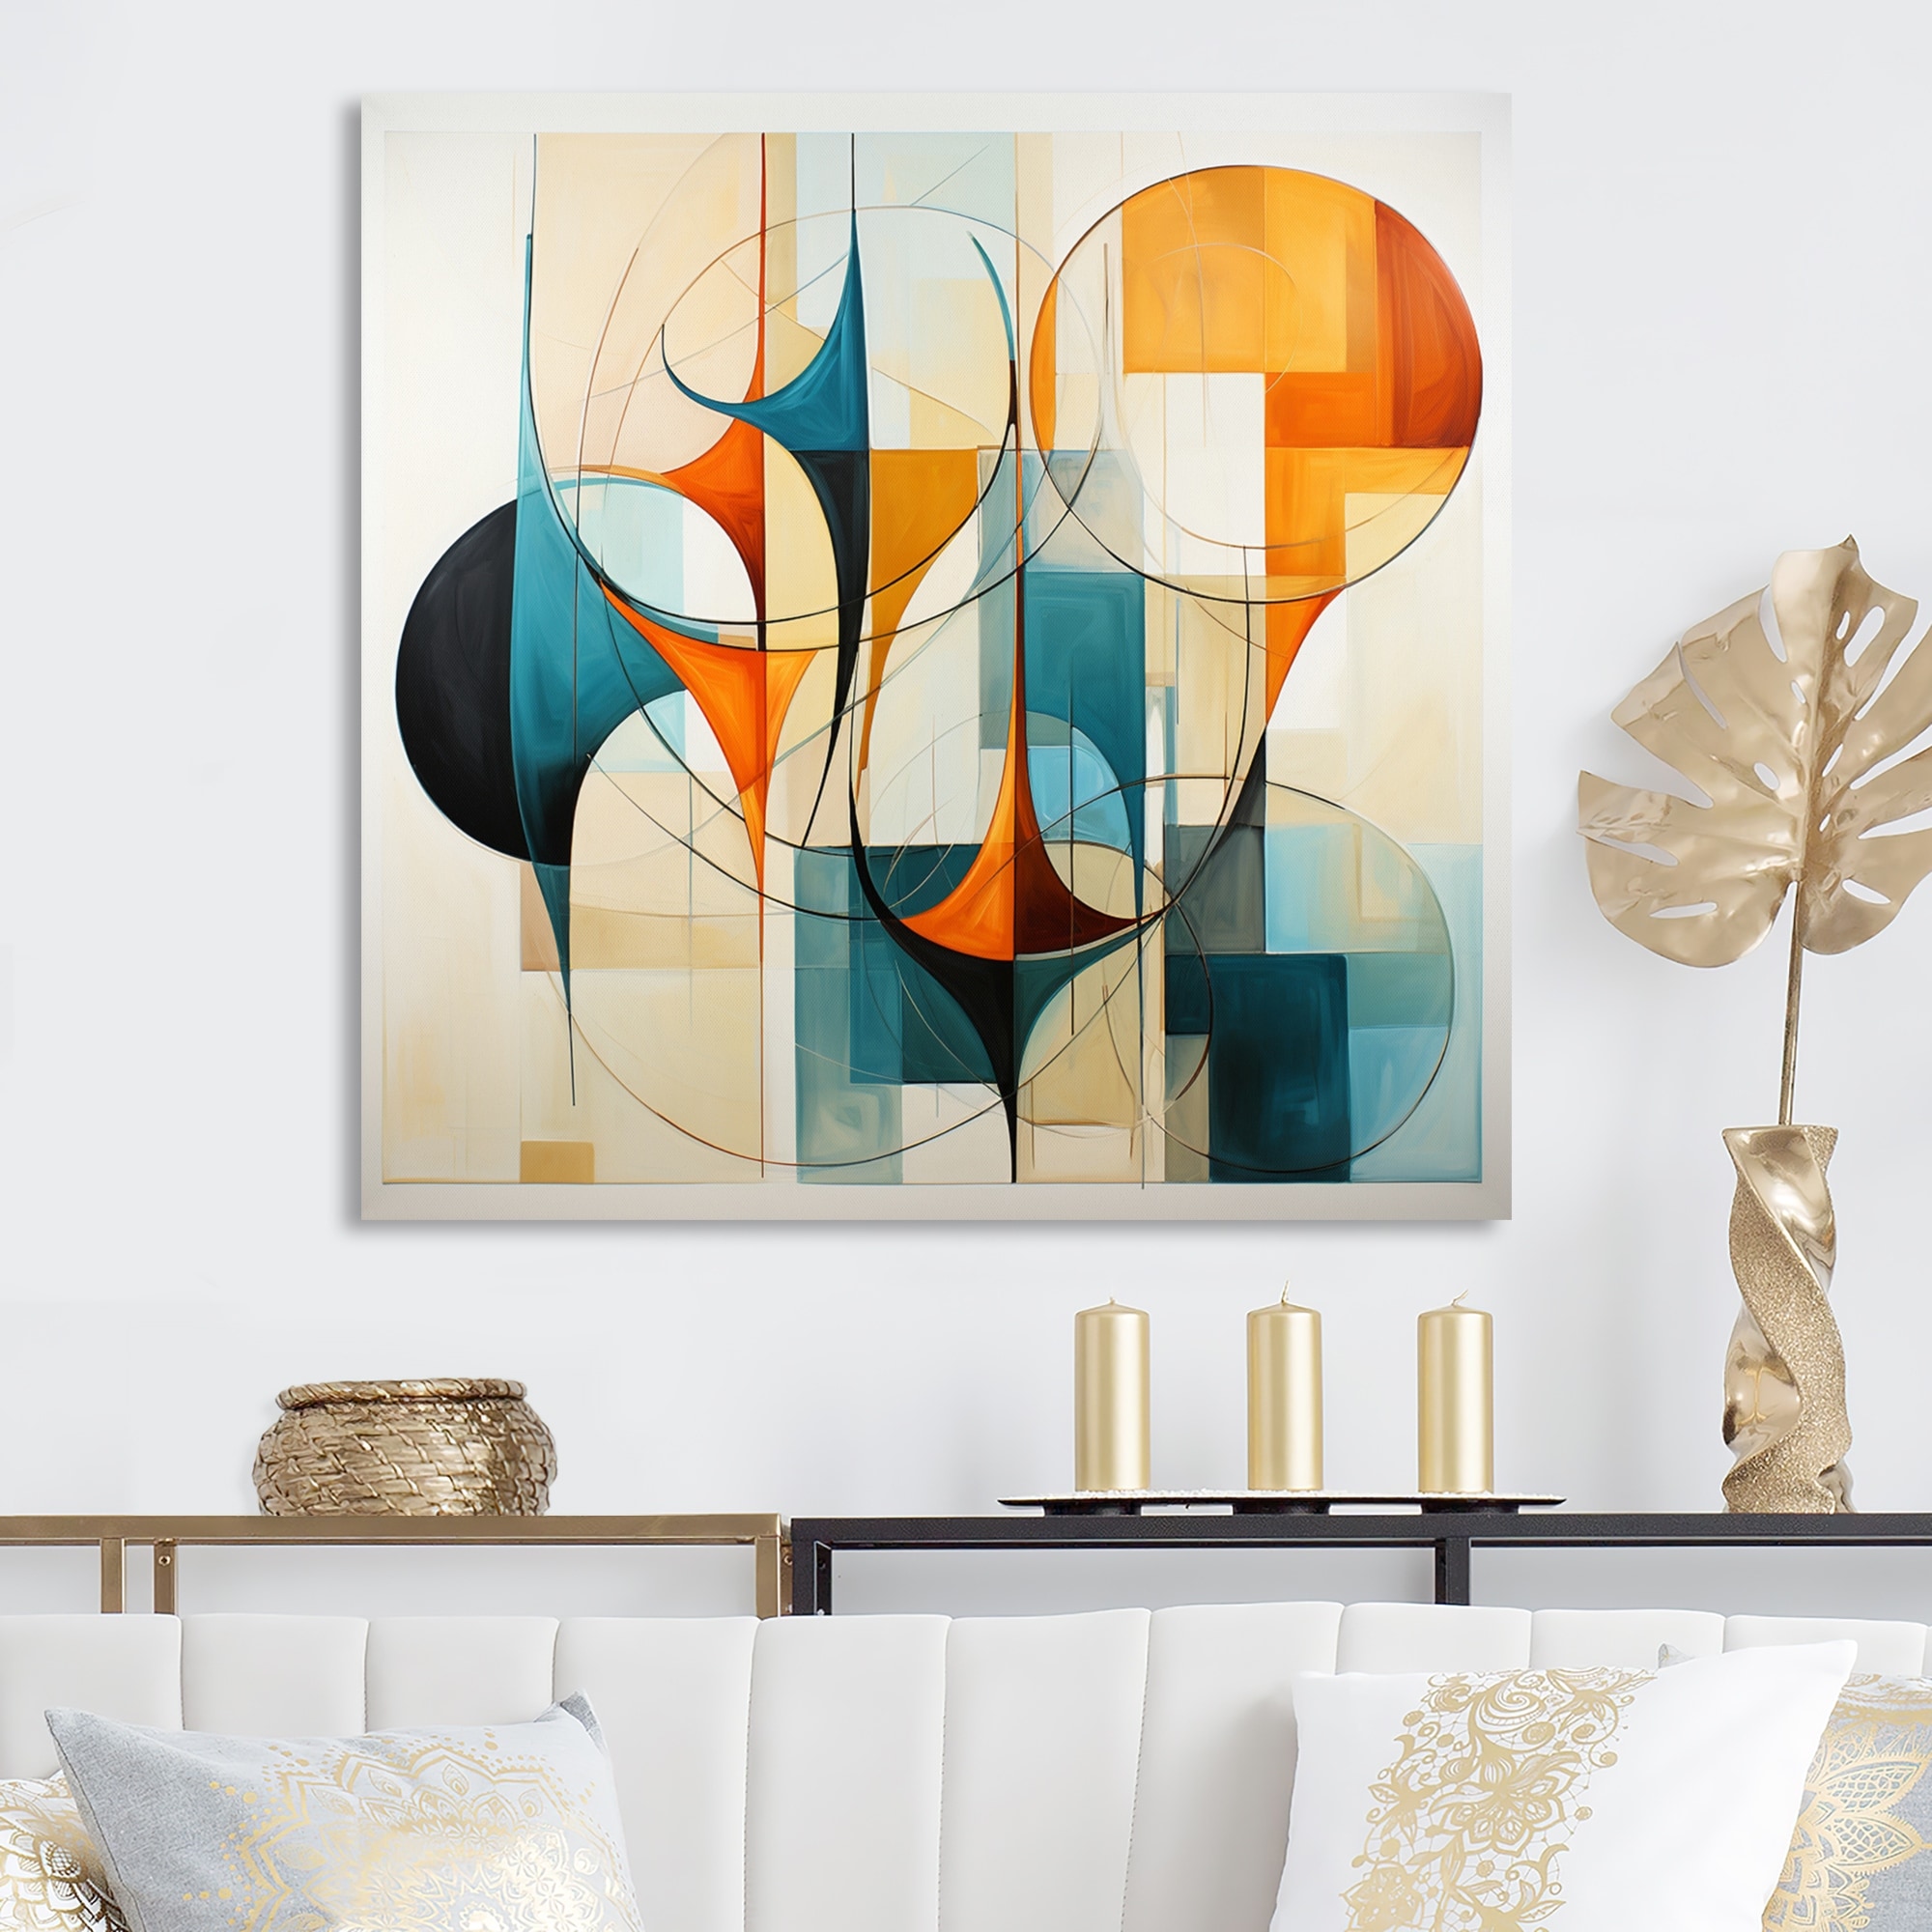 Mid-Century Modern Wall Accents - Bed Bath & Beyond